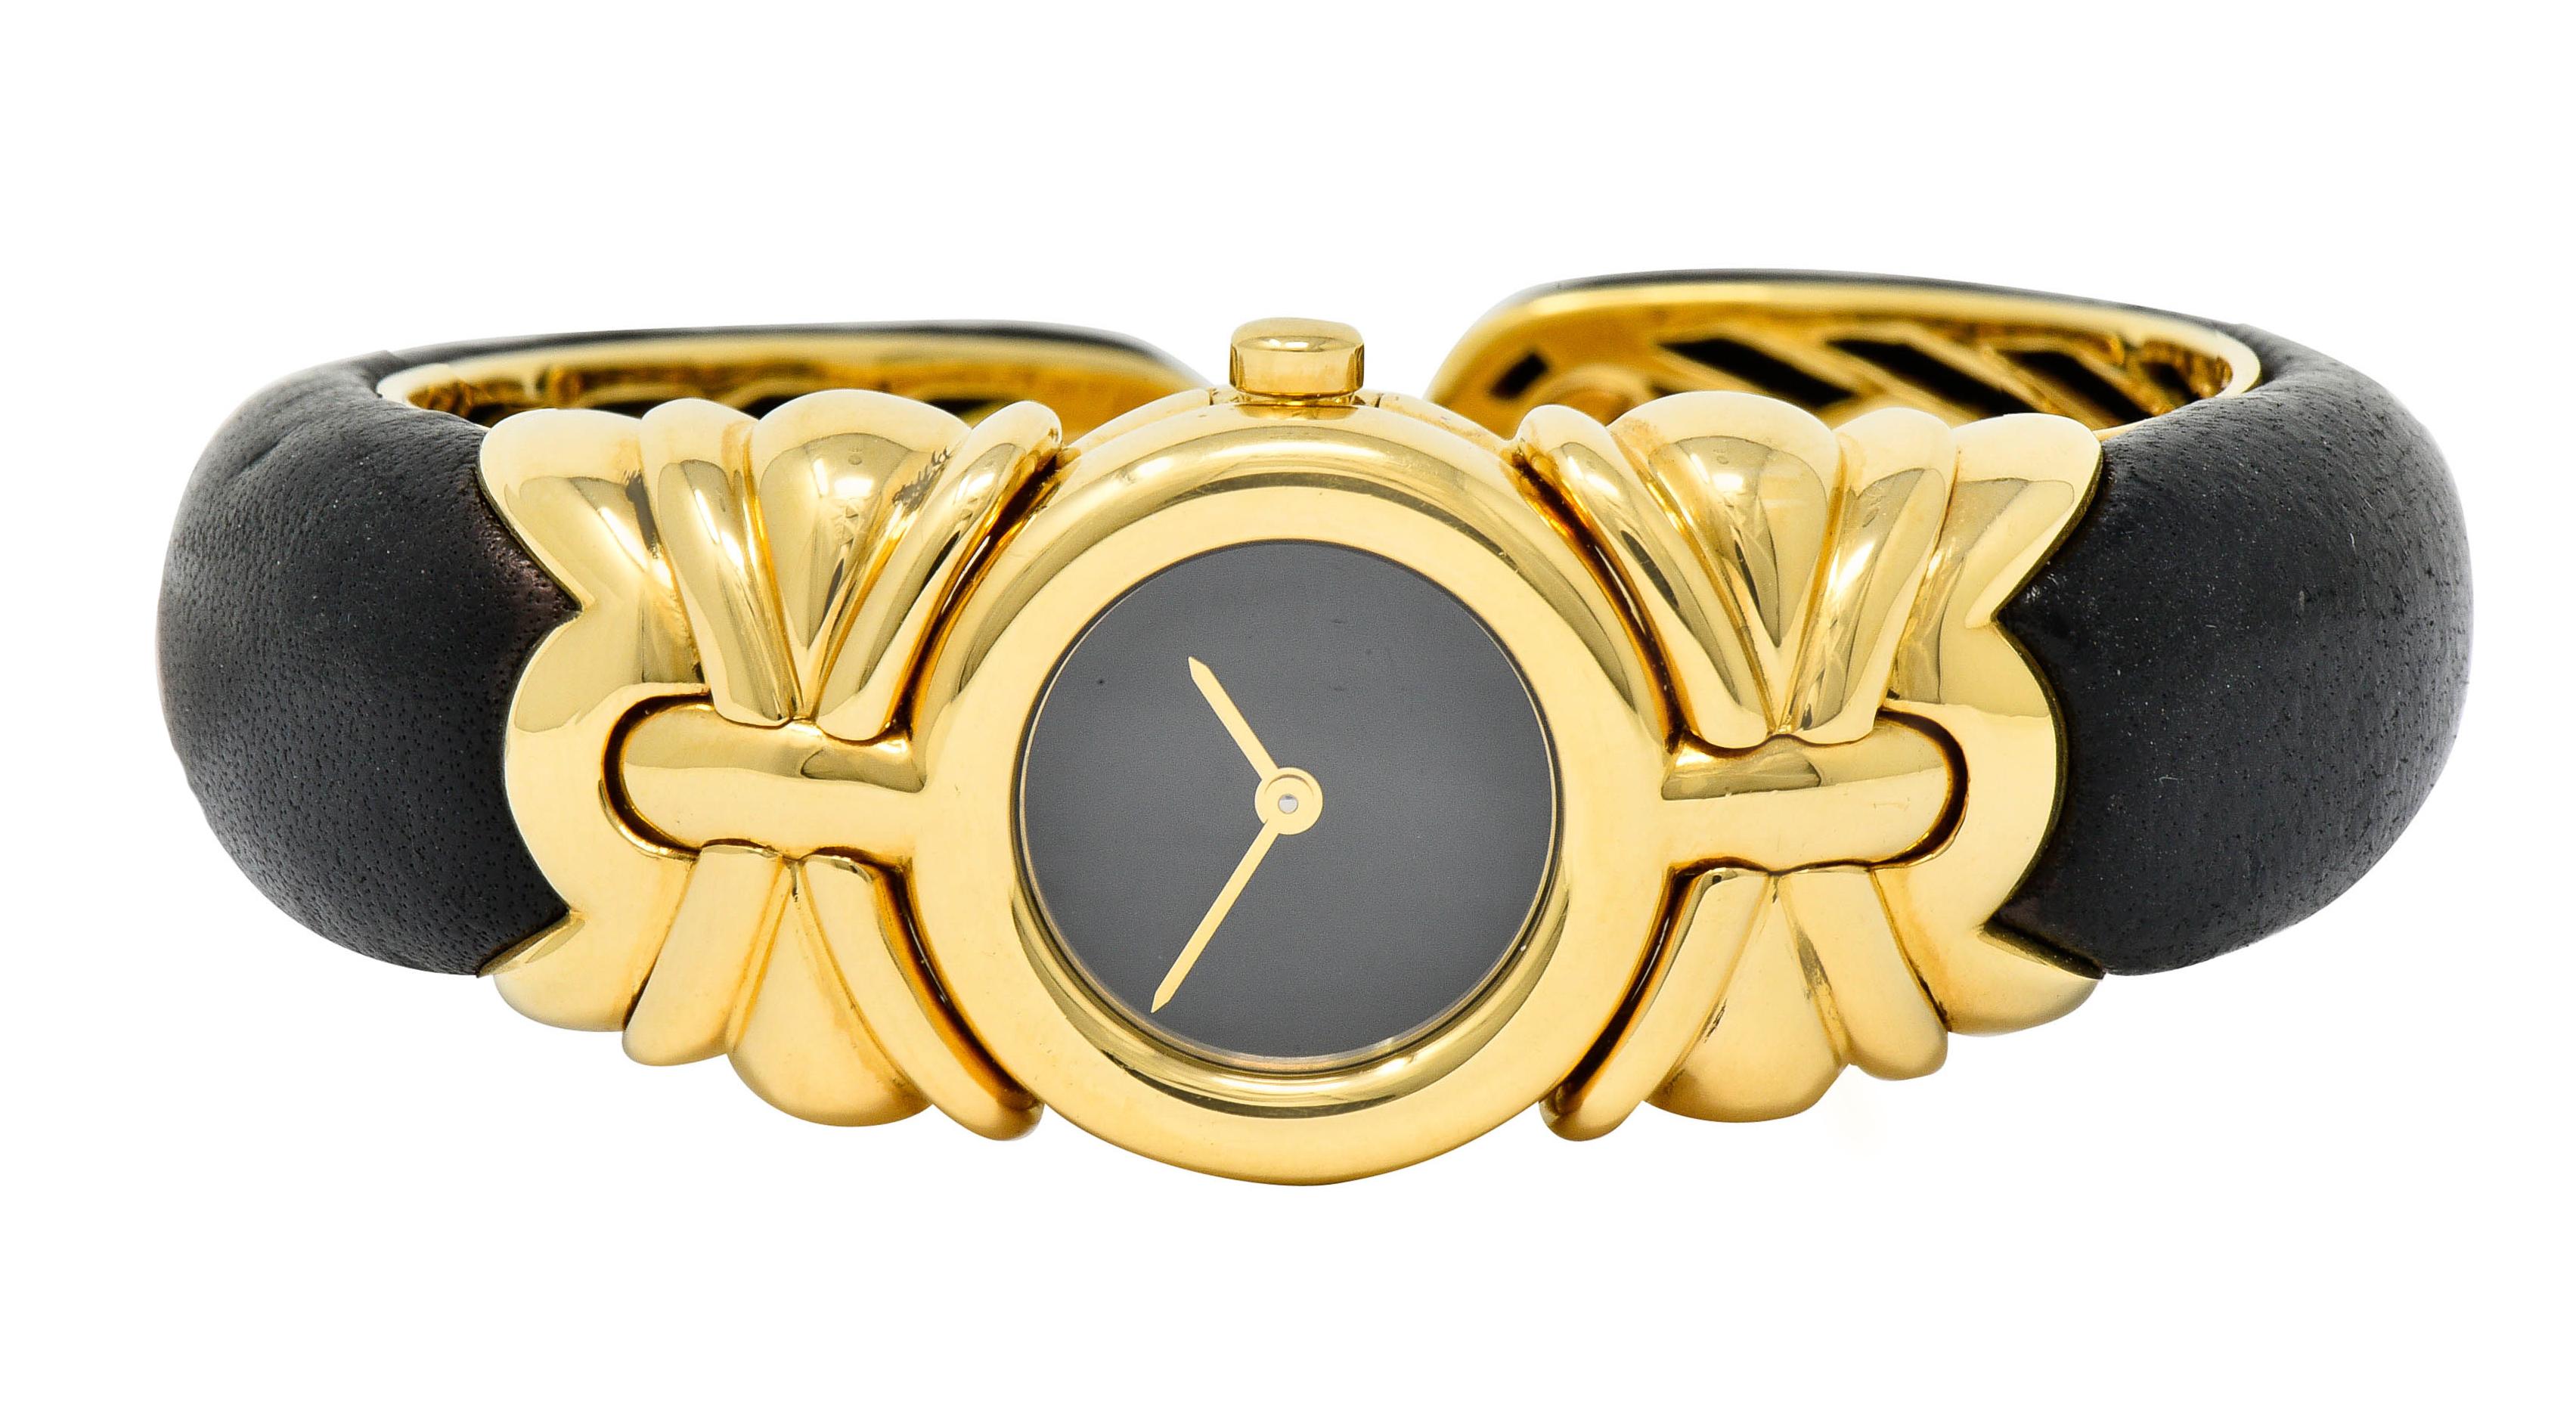 Centering a round sapphire crystal cover over a black watch face and polished gold hands

Surrounded by a polished gold circular bezel with gold crown

Flanked by stylized gold shoulders that complete as a black leather cuff

Cuff is backed by